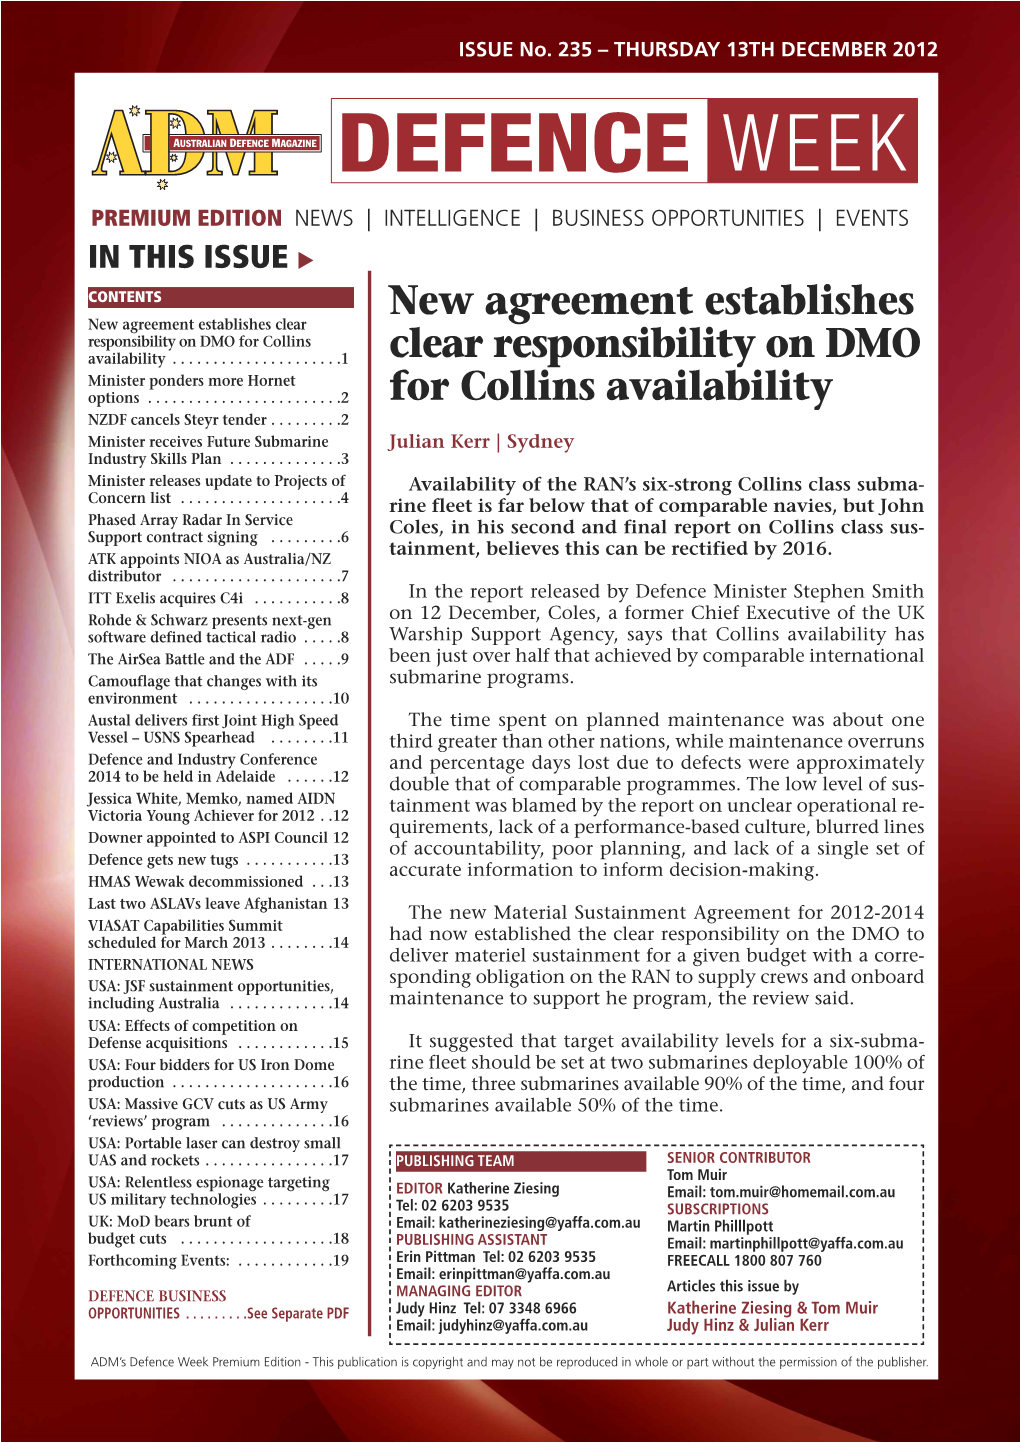 New Agreement Establishes Clear Responsibility on DMO for Collins Availability